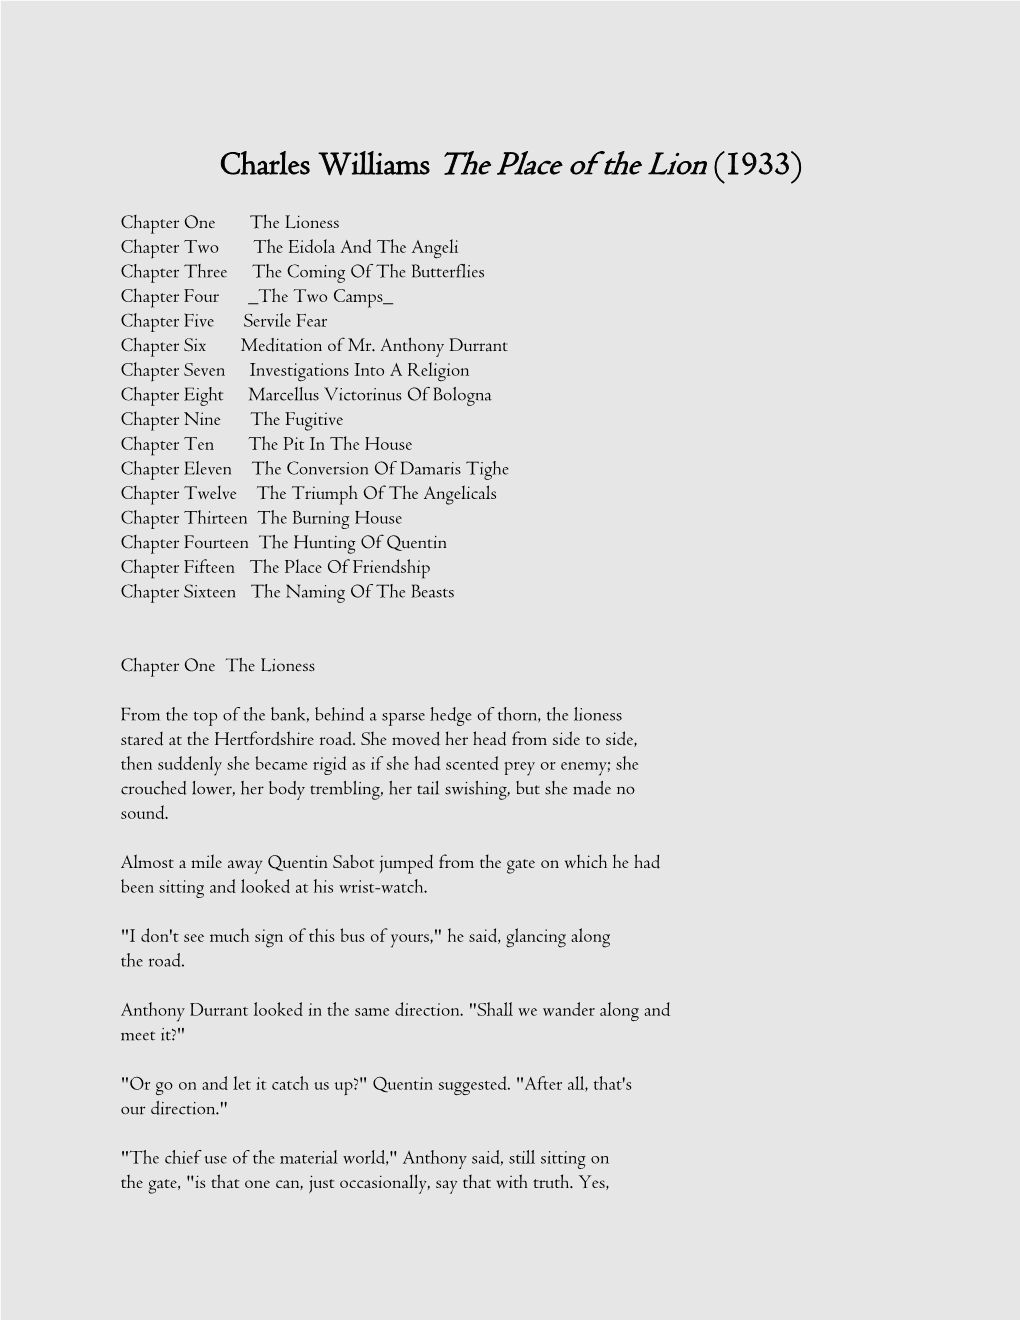 Charles Williams the Place of the Lion (1933)